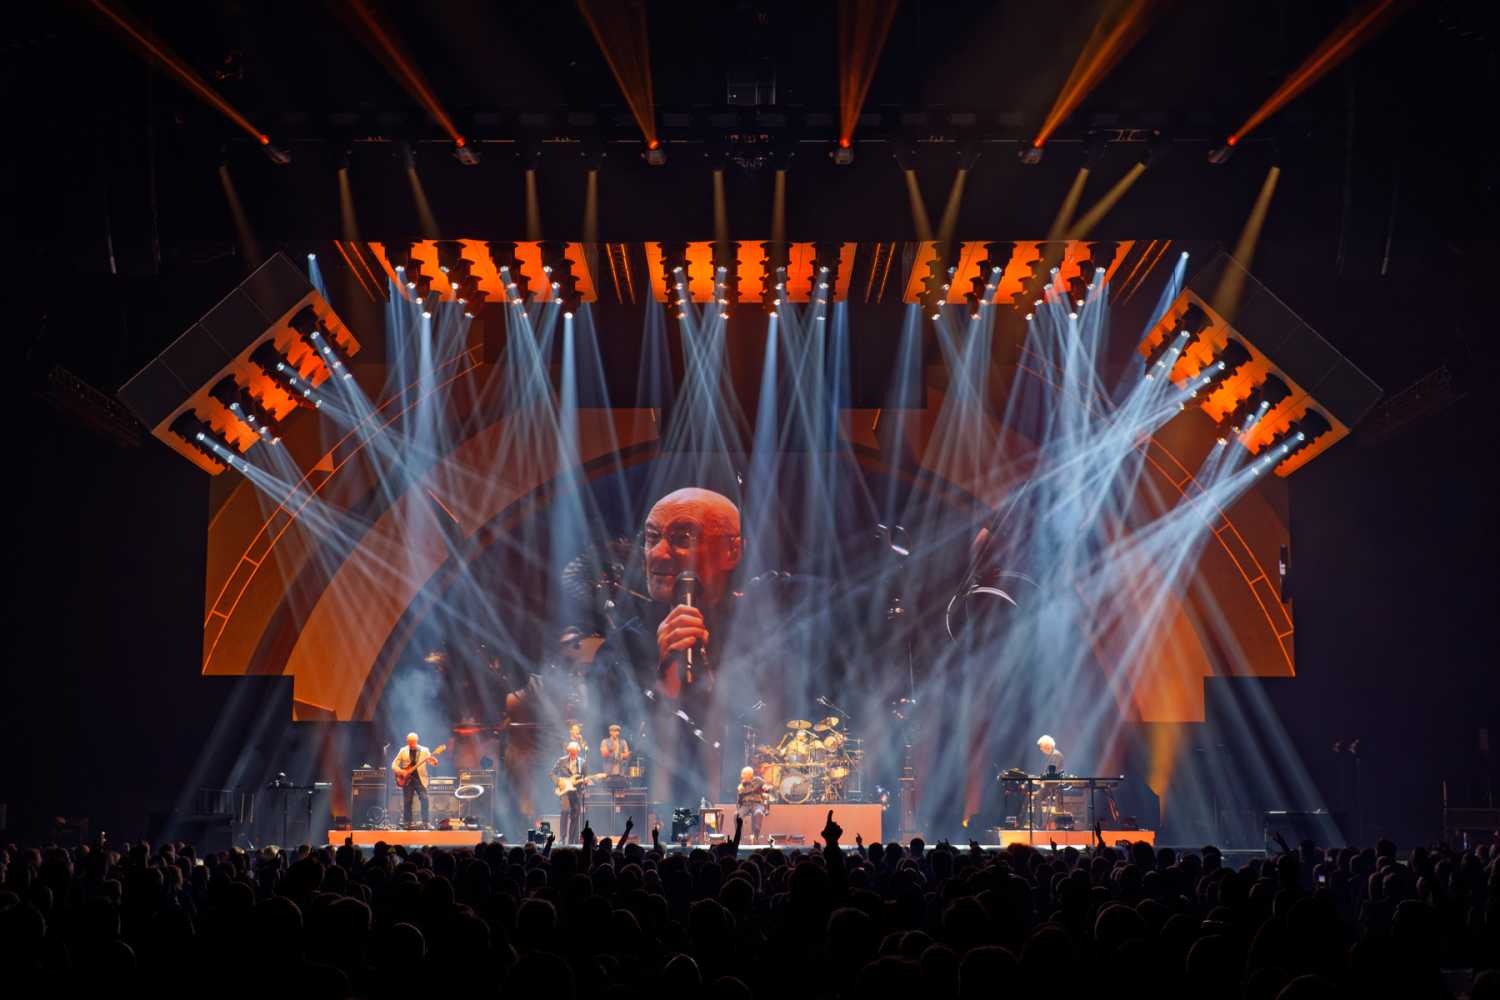 Patrick Woodroffe and Roland Greil designed the set and lighting for the tour (photo: M H Vogel)